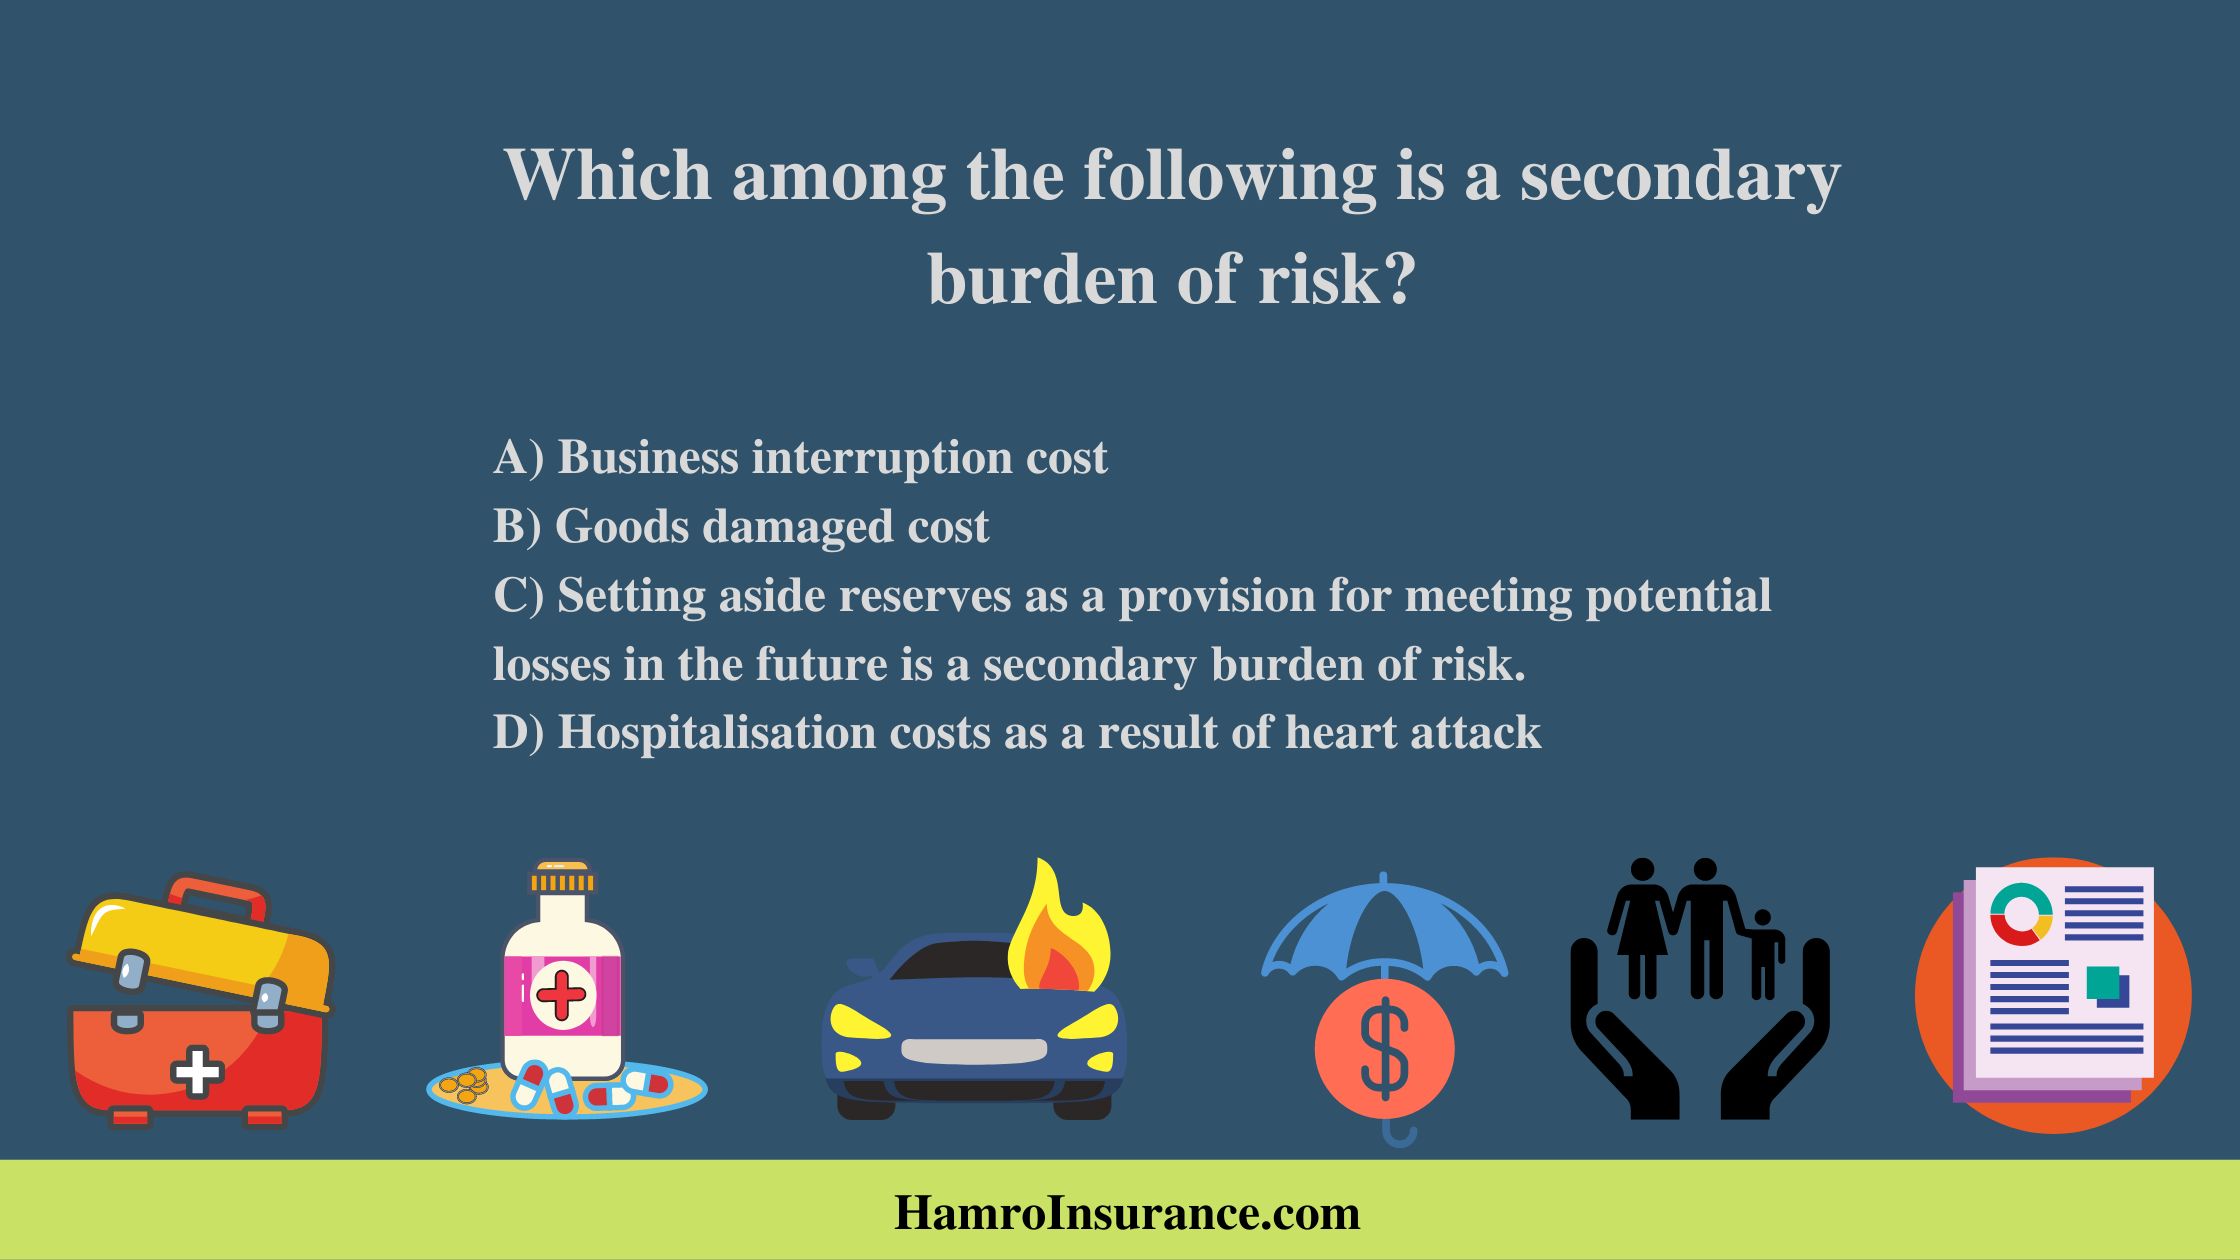 Which among the following is a secondary burden of risk?